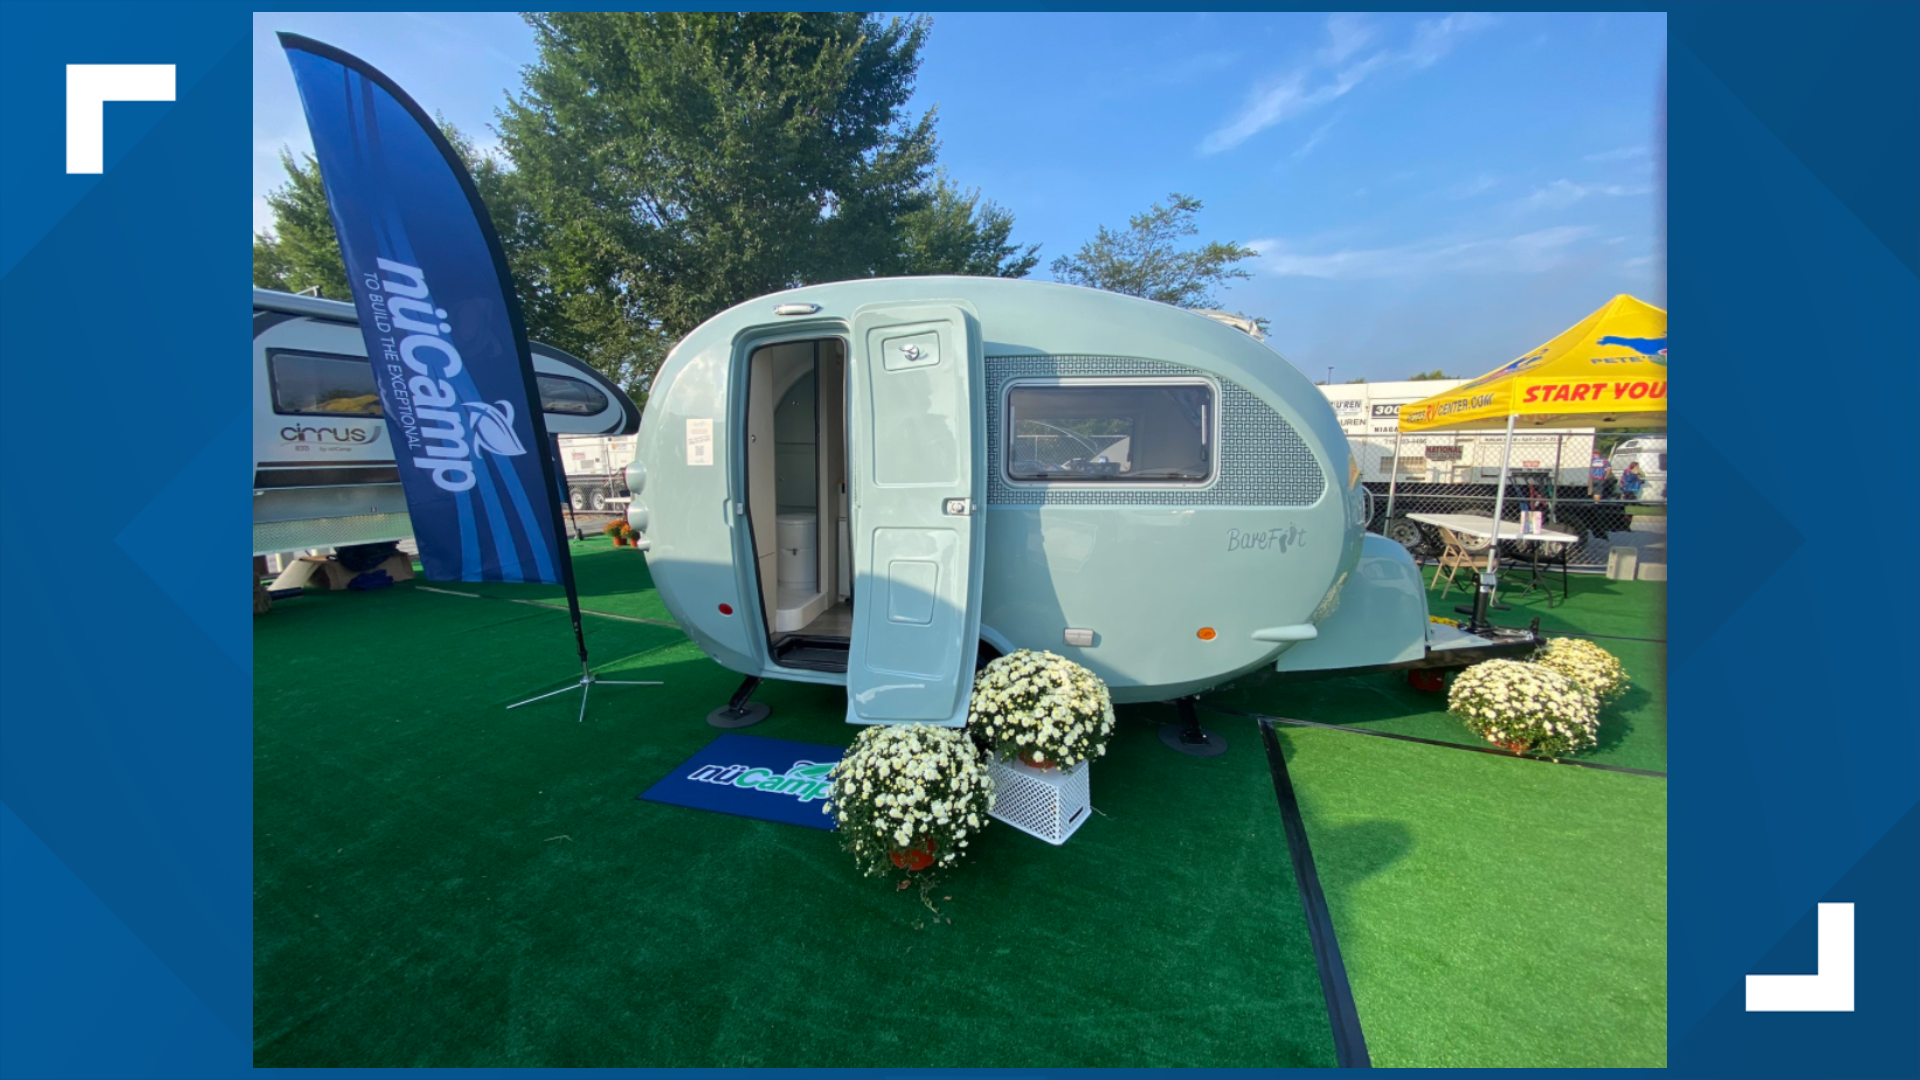 Whether you're new to the RV industry, looking to upgrade, or just want to browse—there's plenty to see and buy at the show for the next few days.